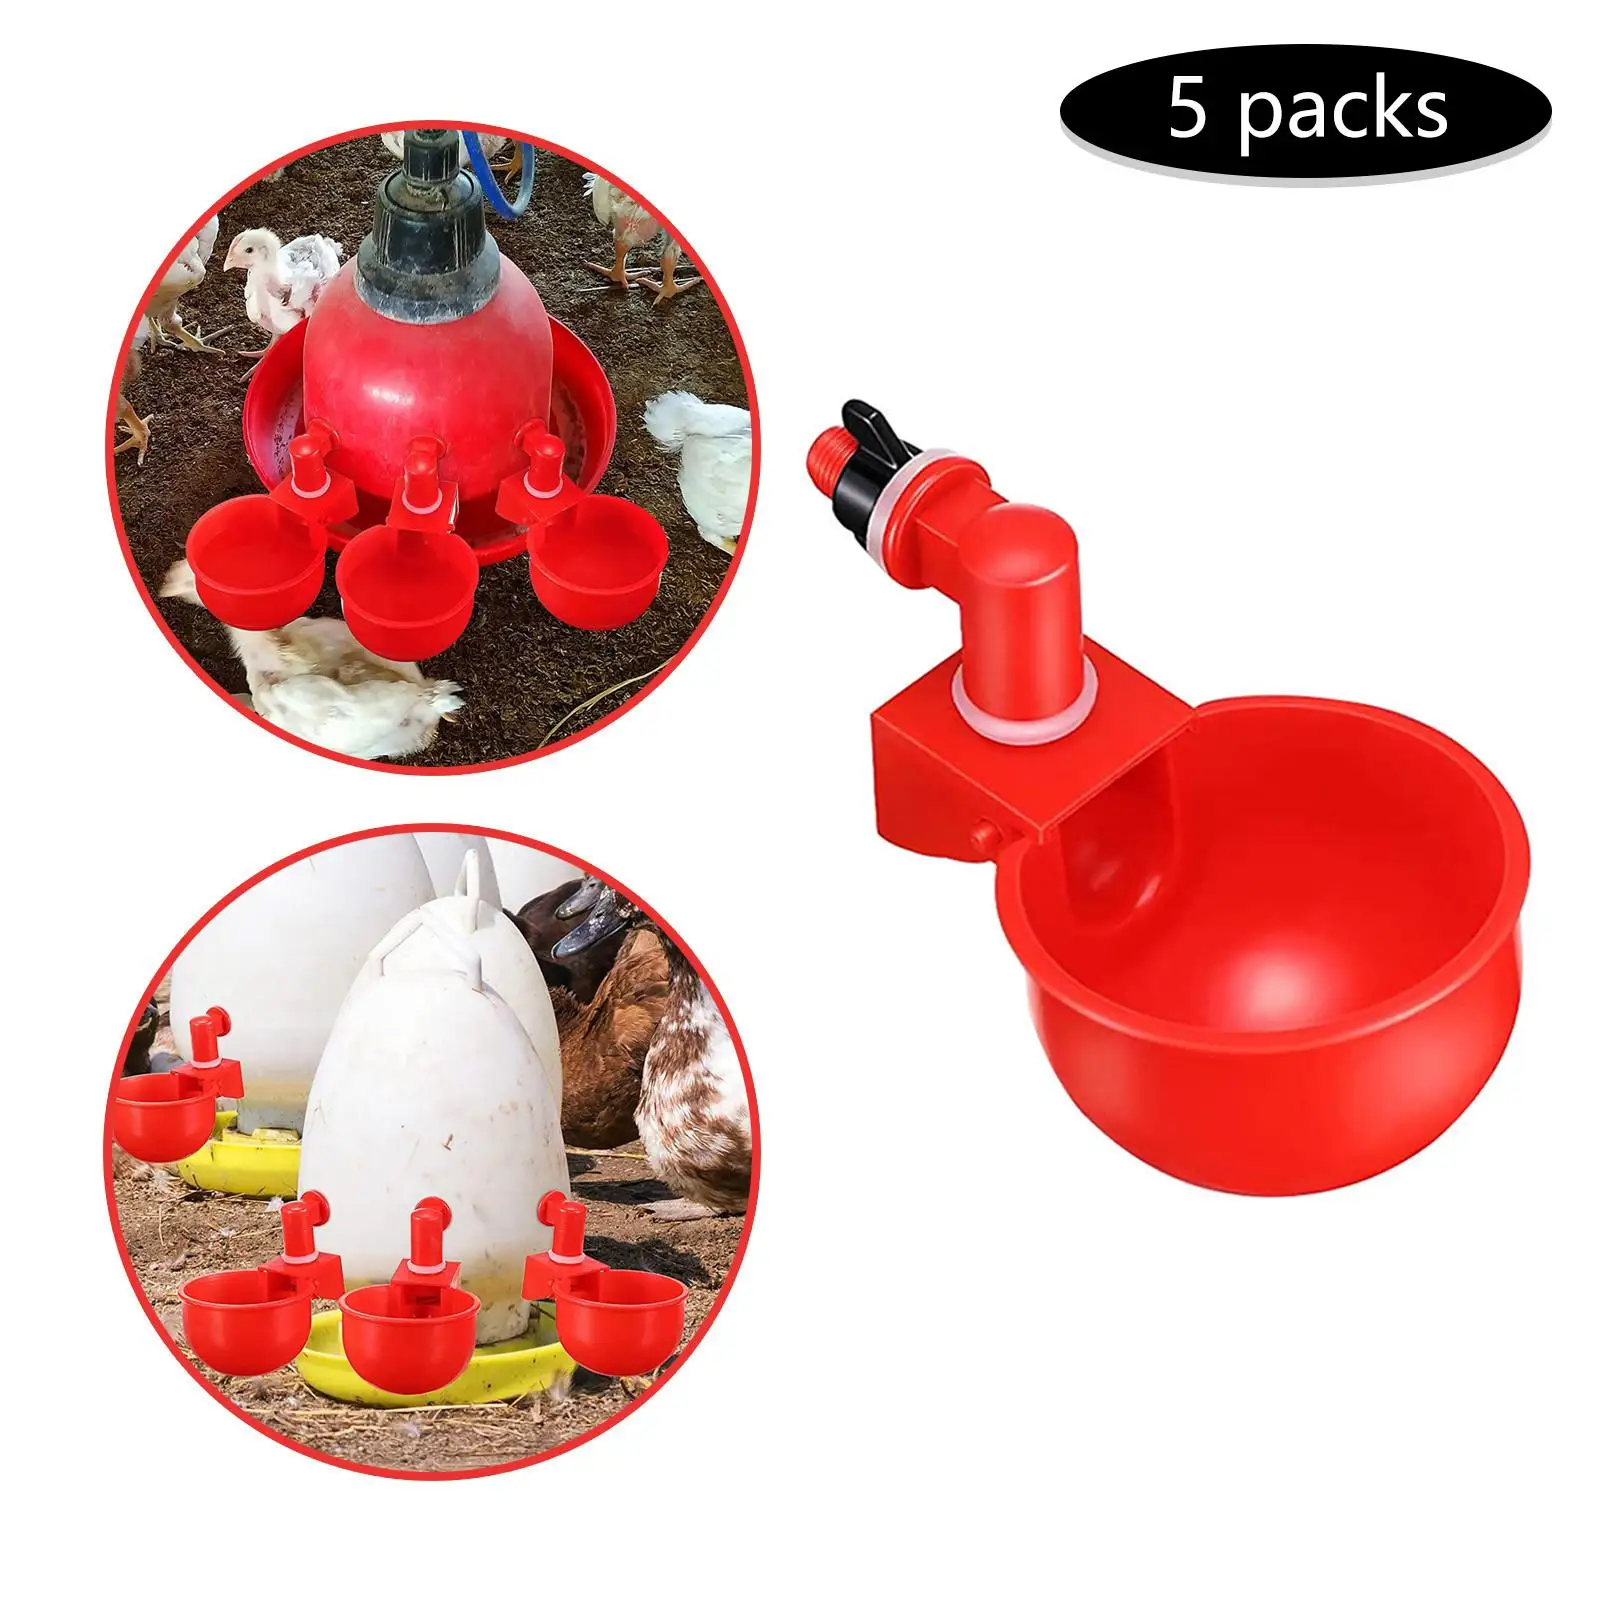 5PCS Automatic Poultry Water Drinking Cups Drinker for Bird Chicken Fowl Chick 